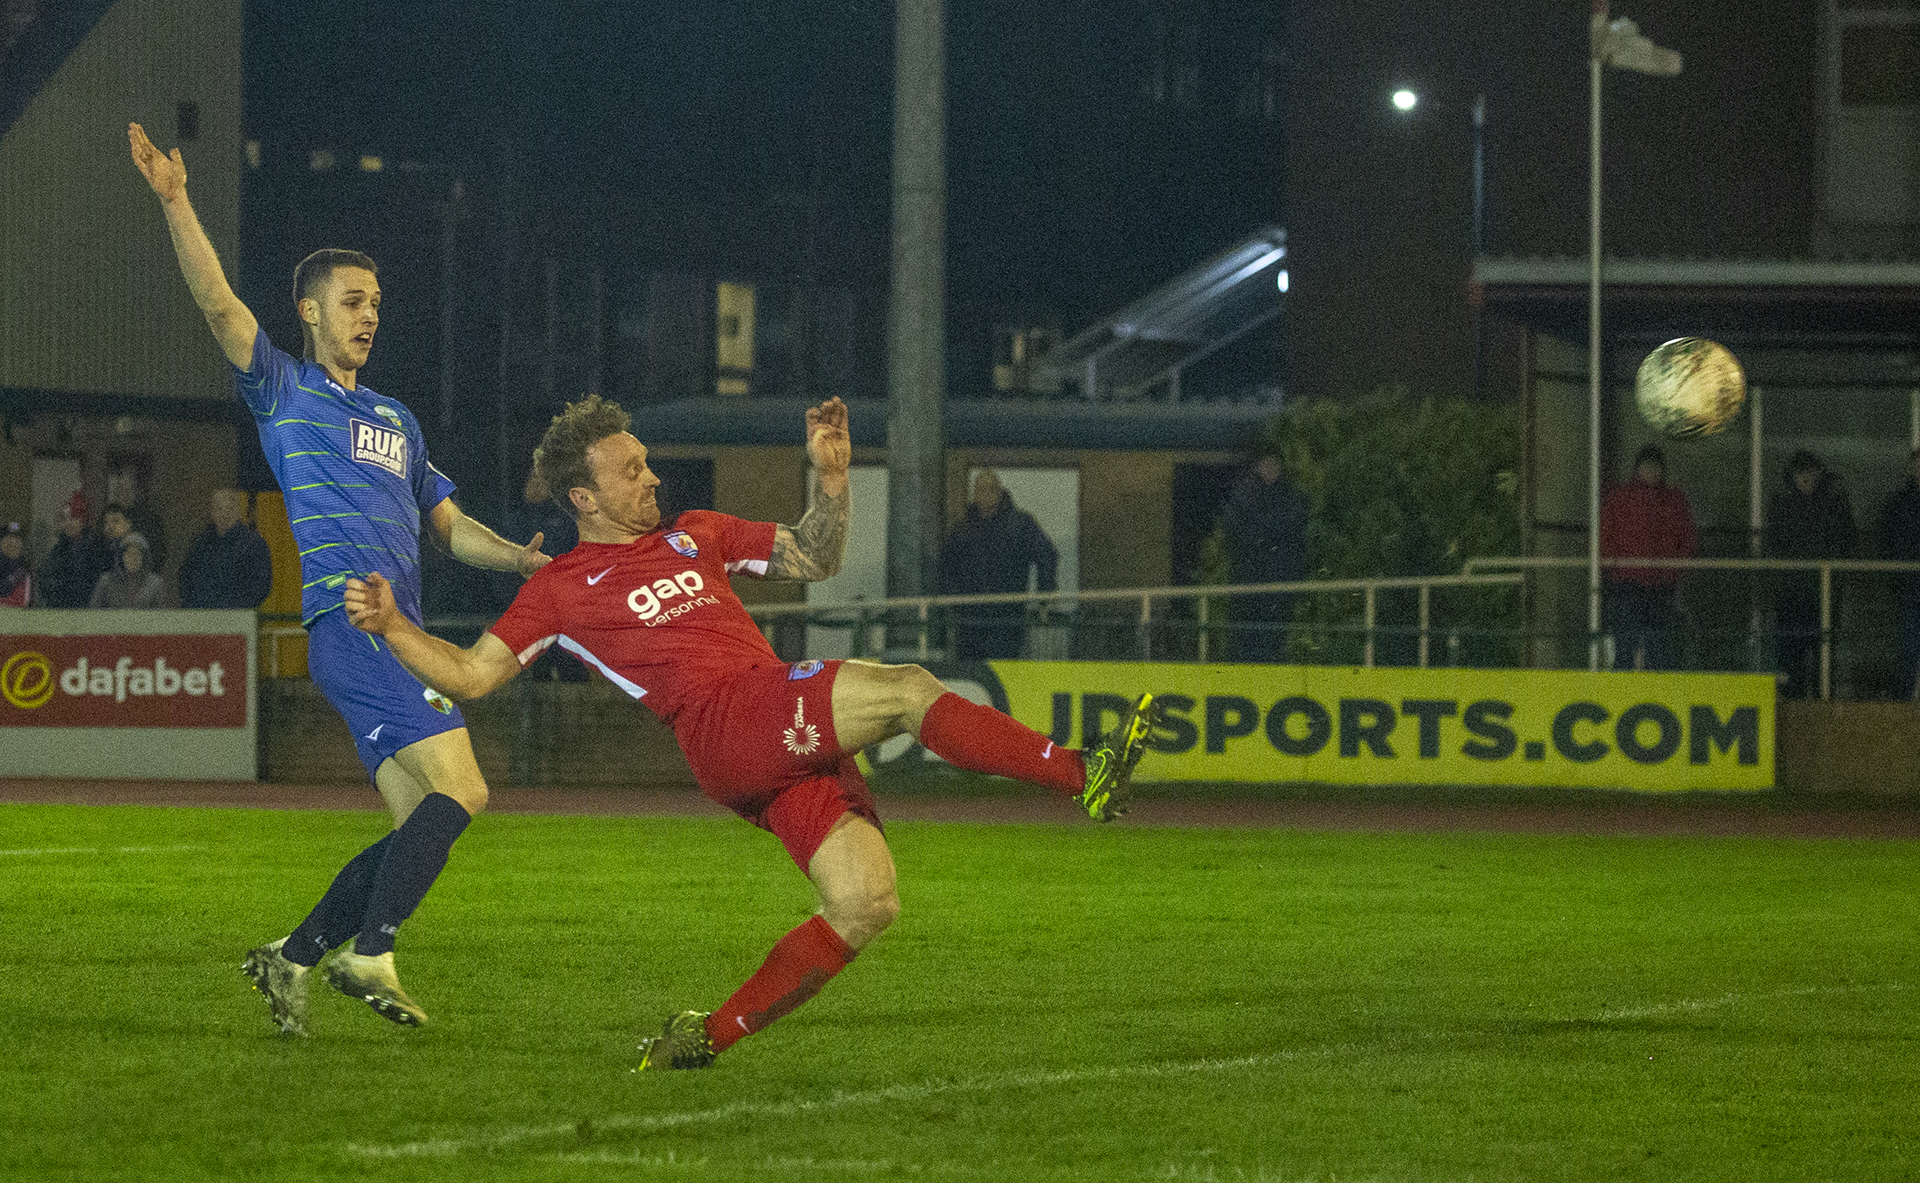 Craig Curran puts The Nomads ahead in the seventh minute of first half injury time | © NCM Media